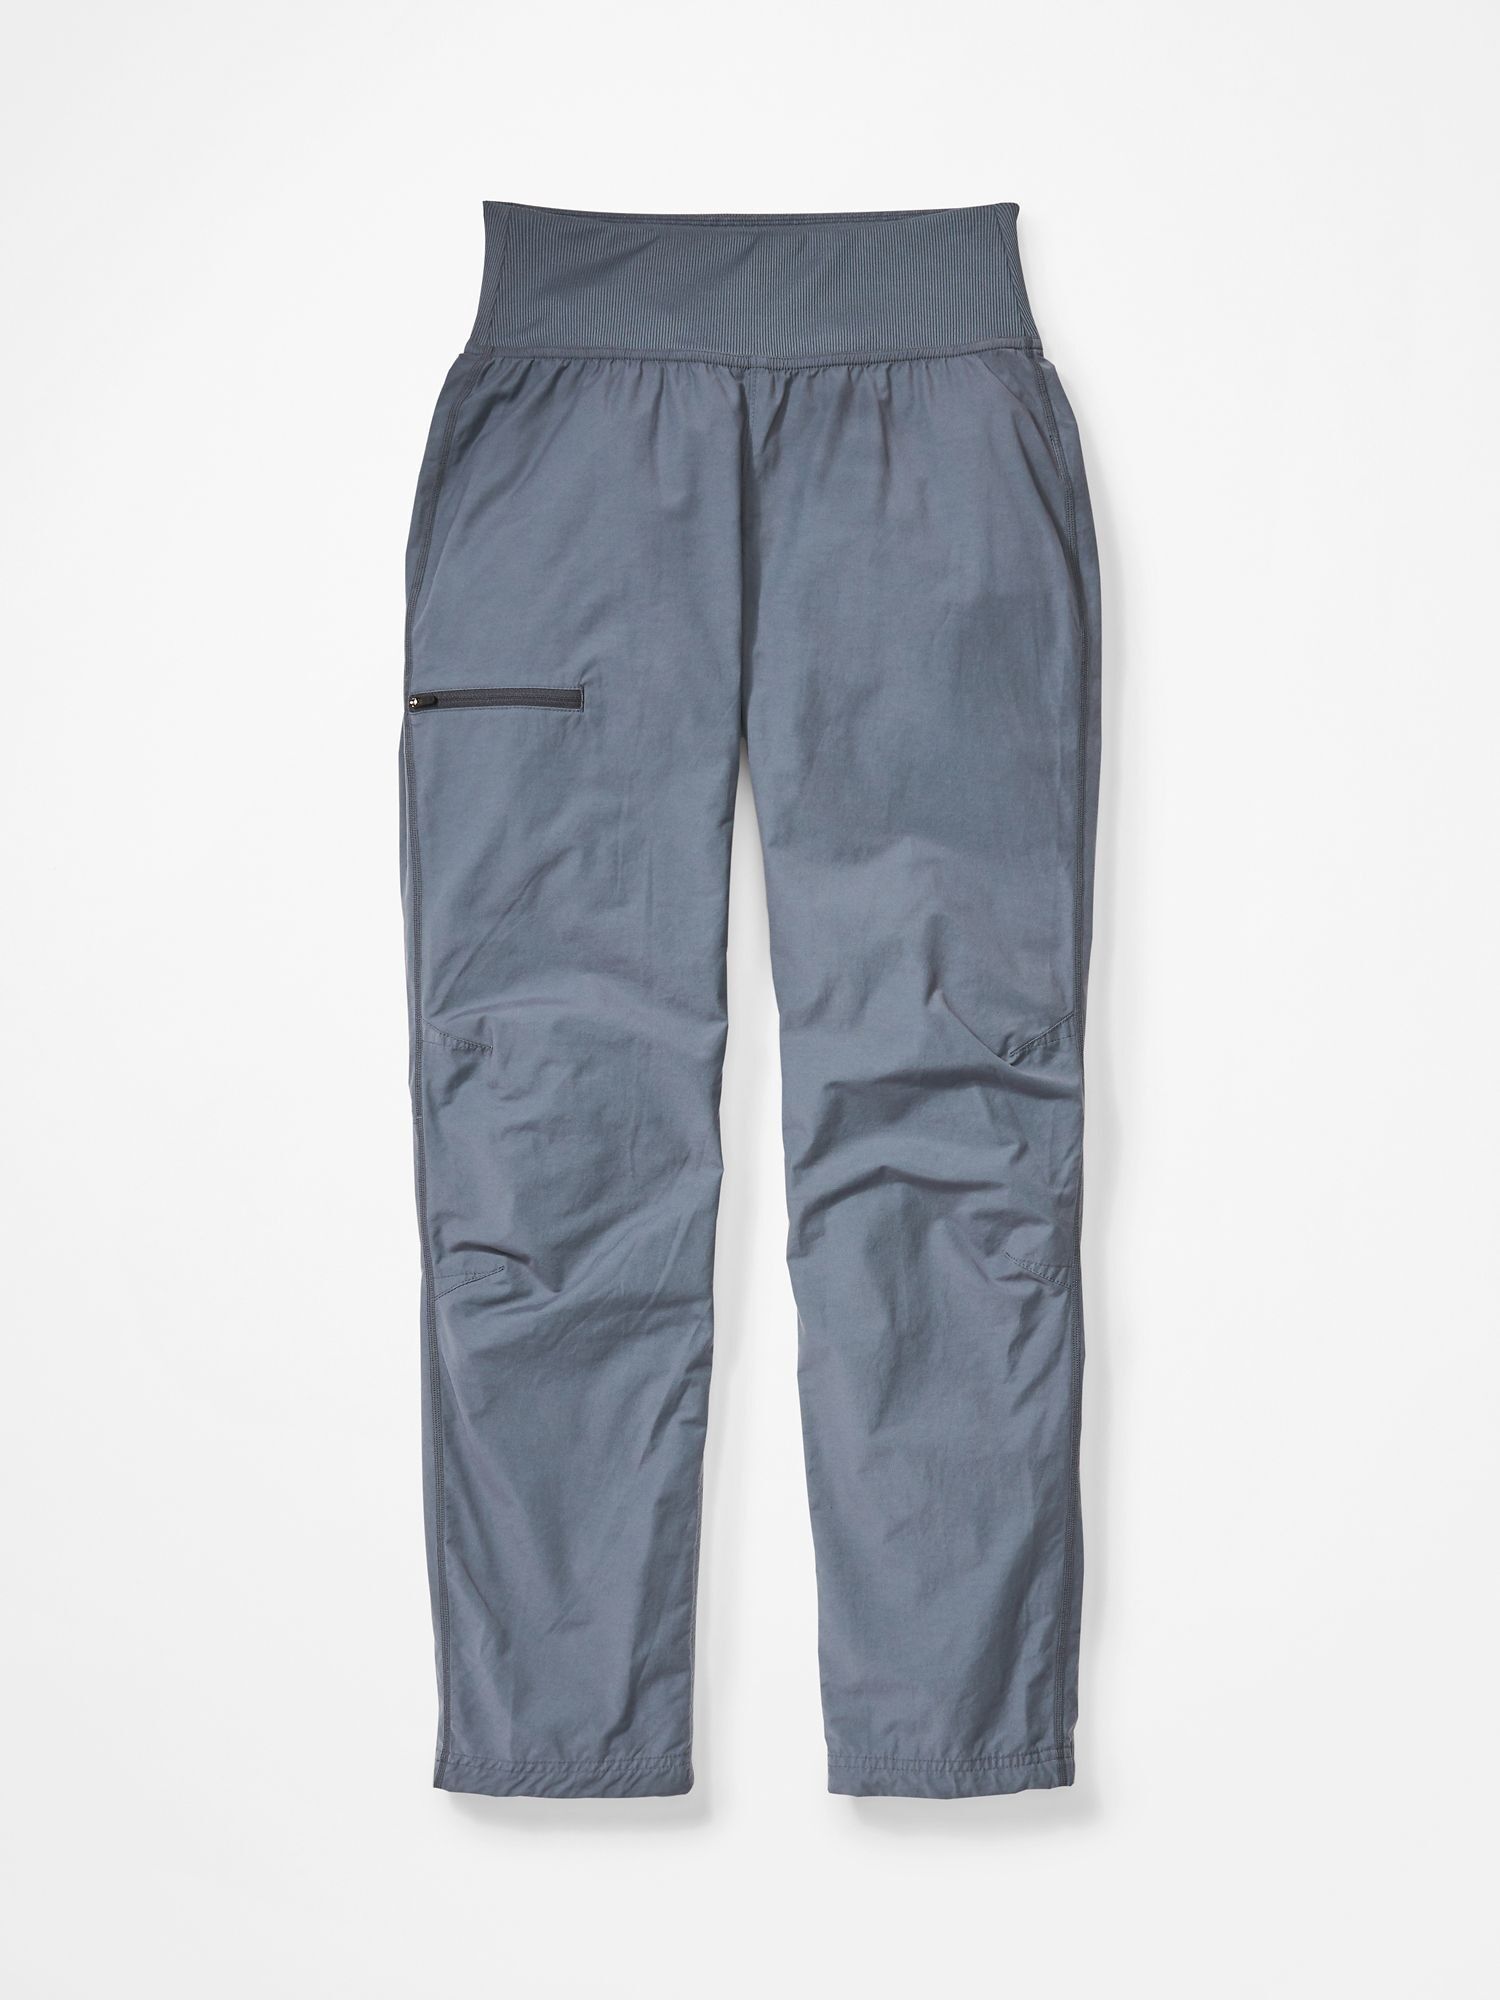 Marmot Dihedral Pant - Hiking Trousers - Women's